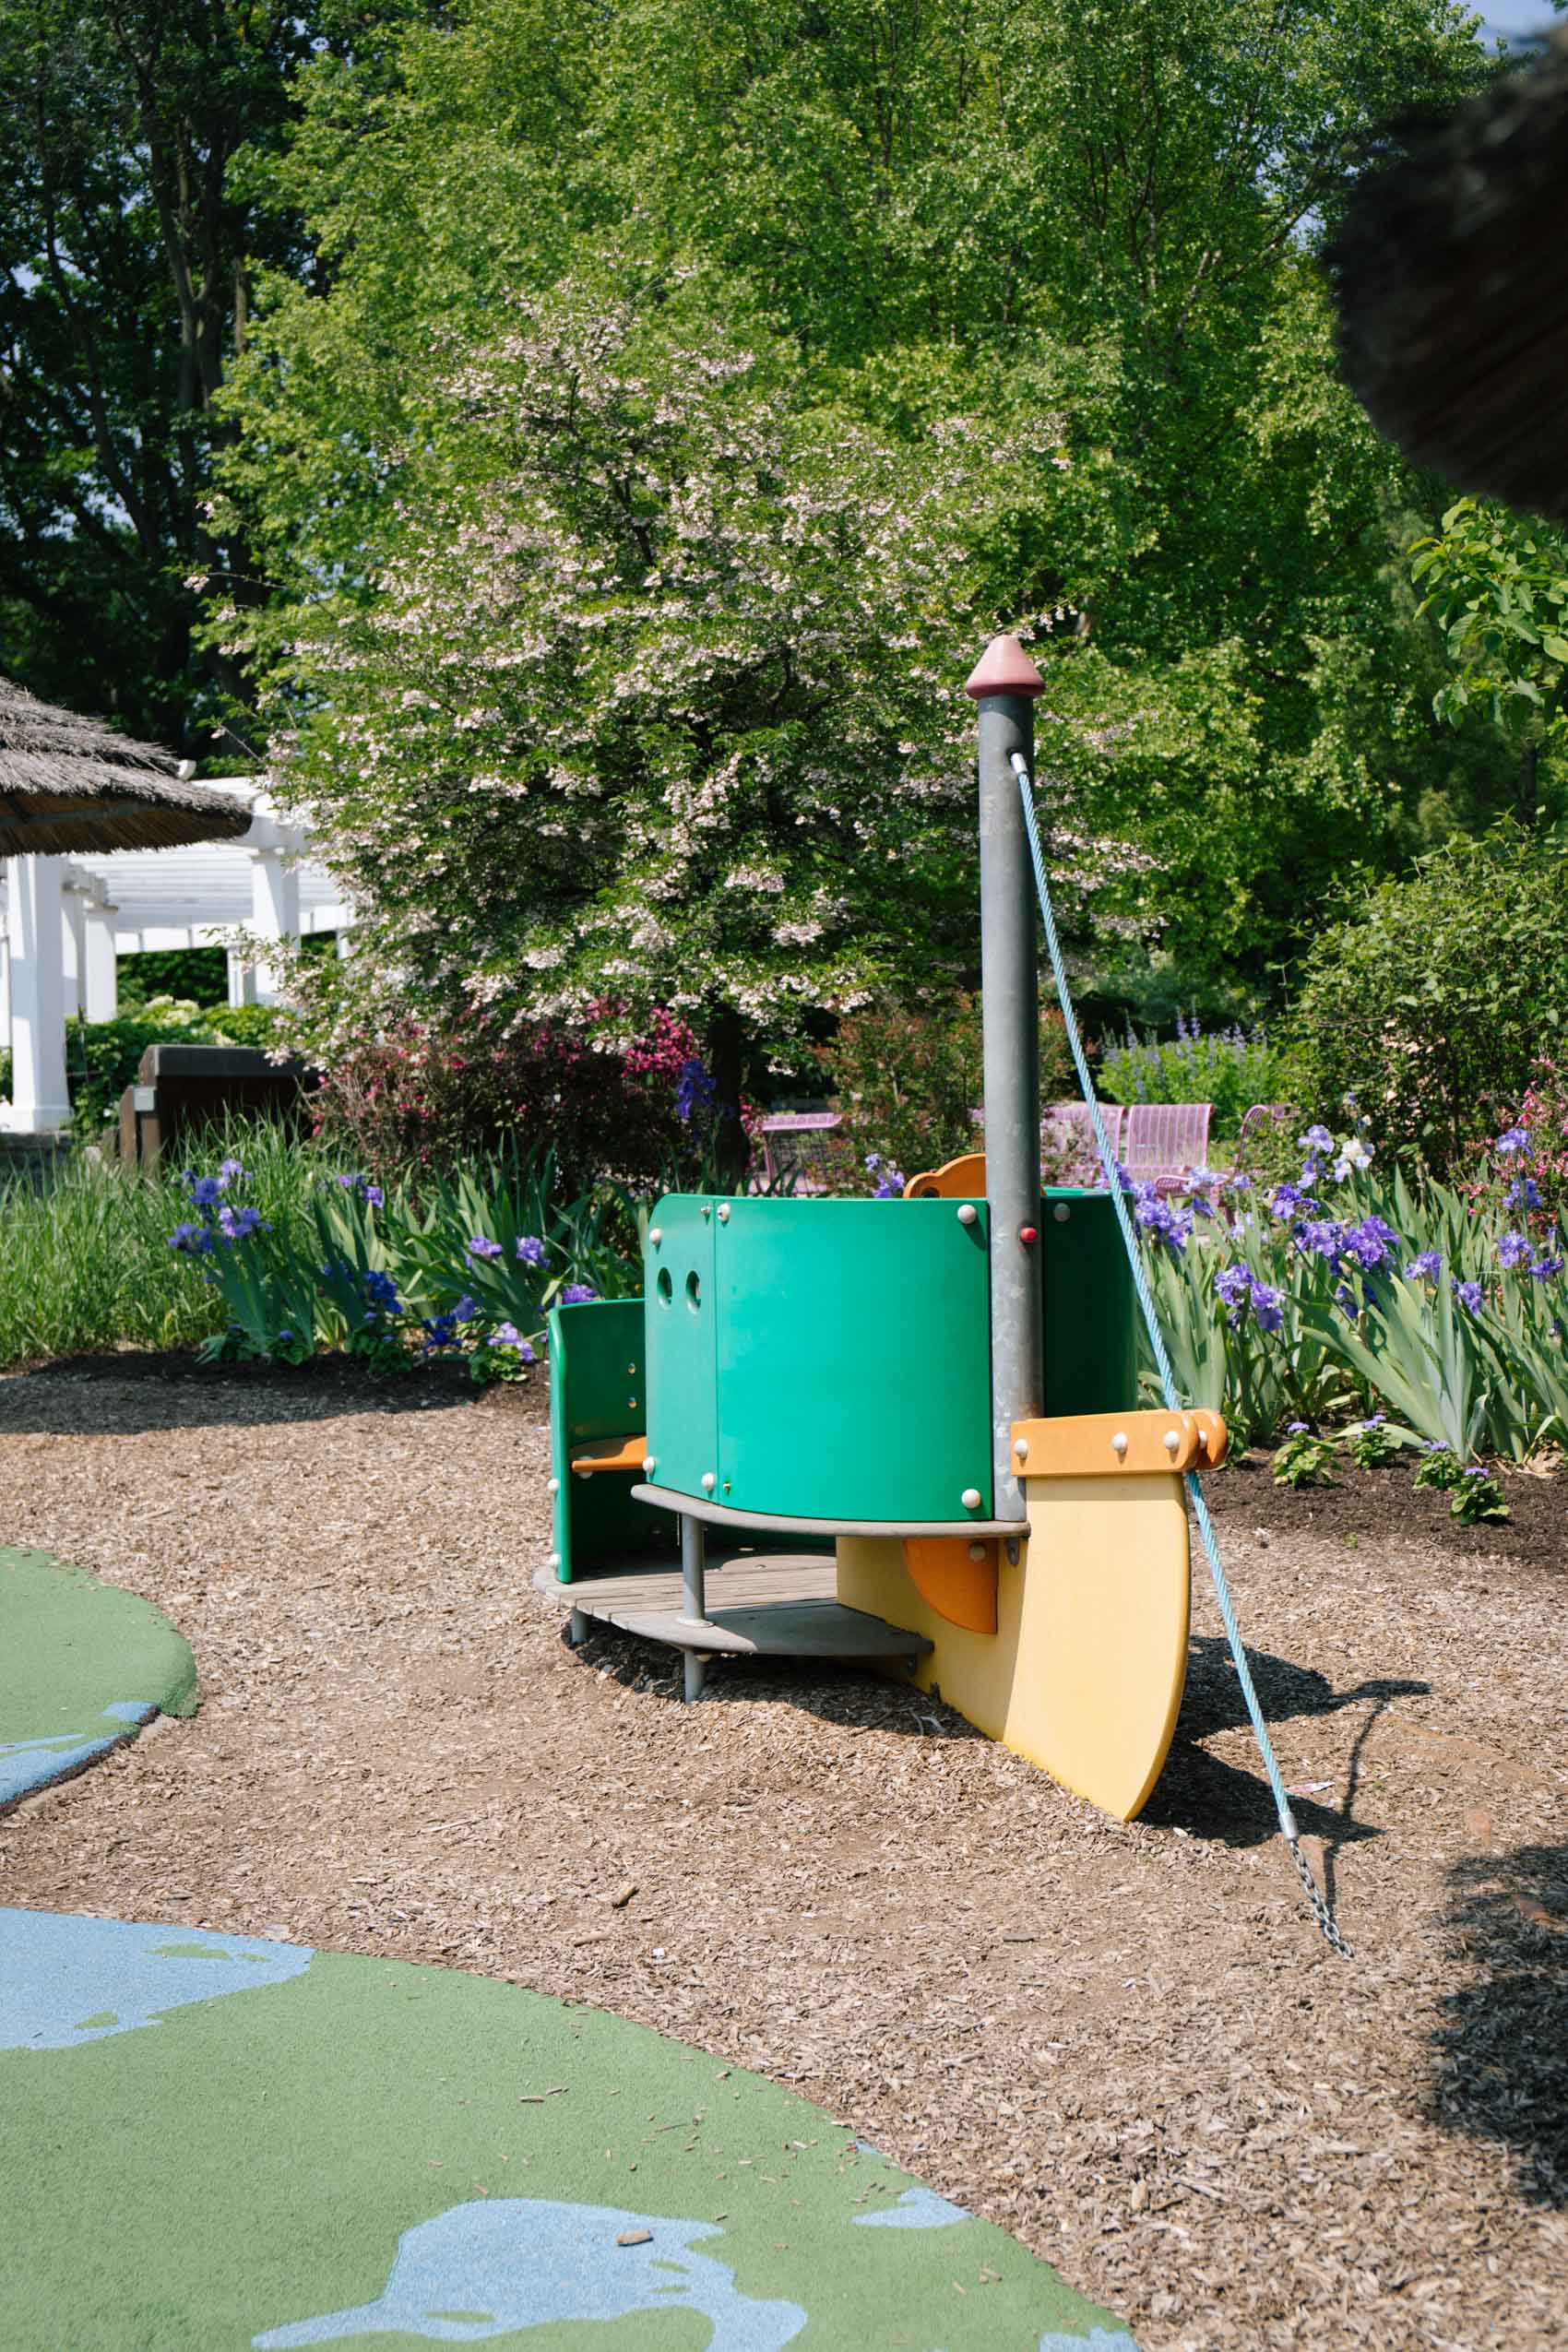 A sailboat playset for kids in The Children's Garden at Hershey Gardens 